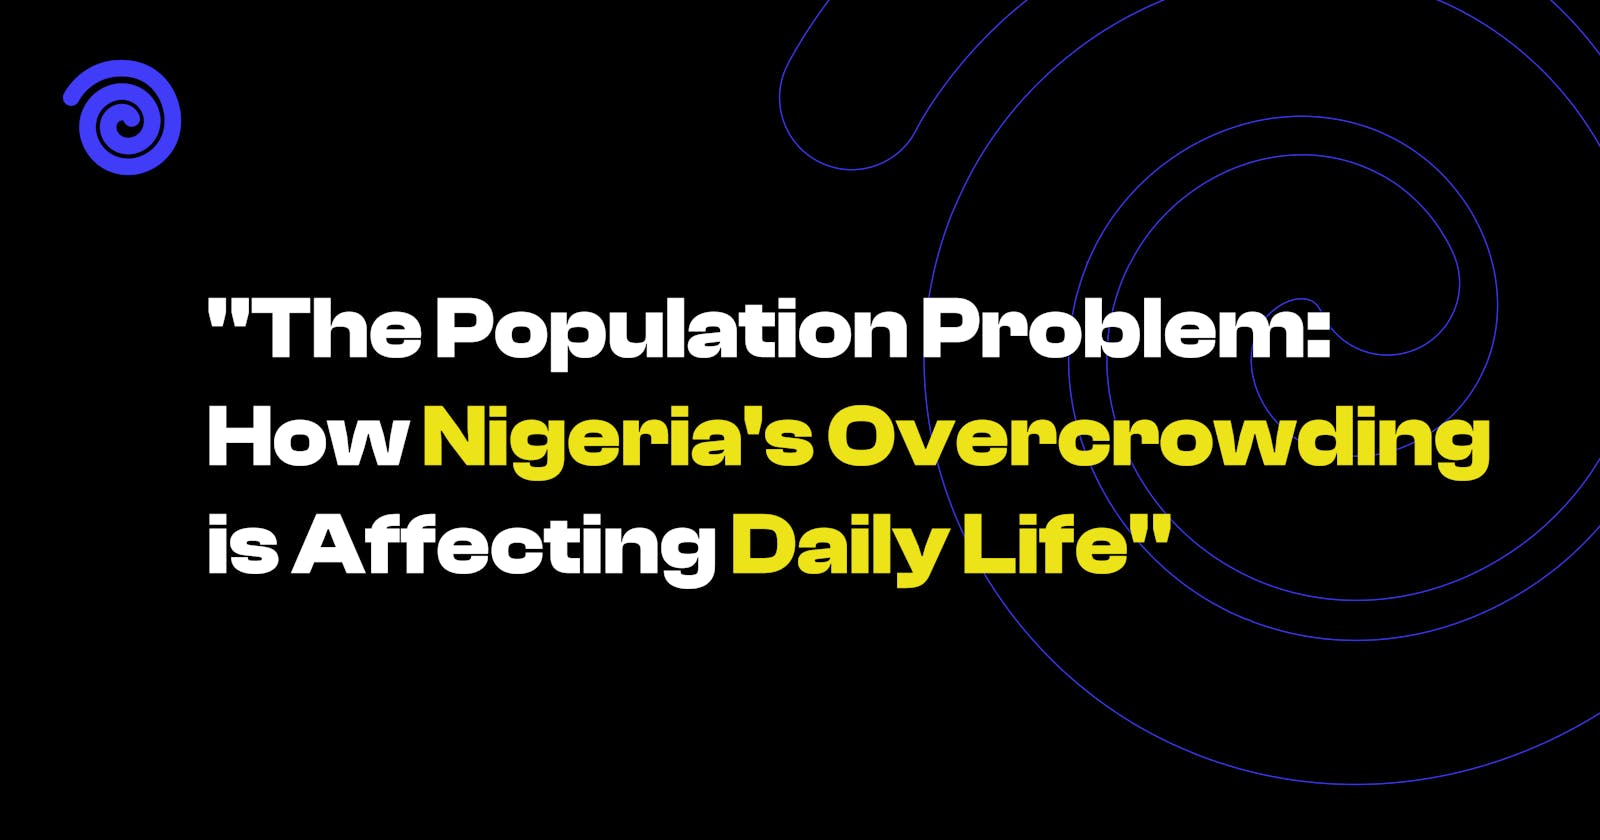 The Population Problem: How Nigeria’s Overcrowding is Affecting Daily Life